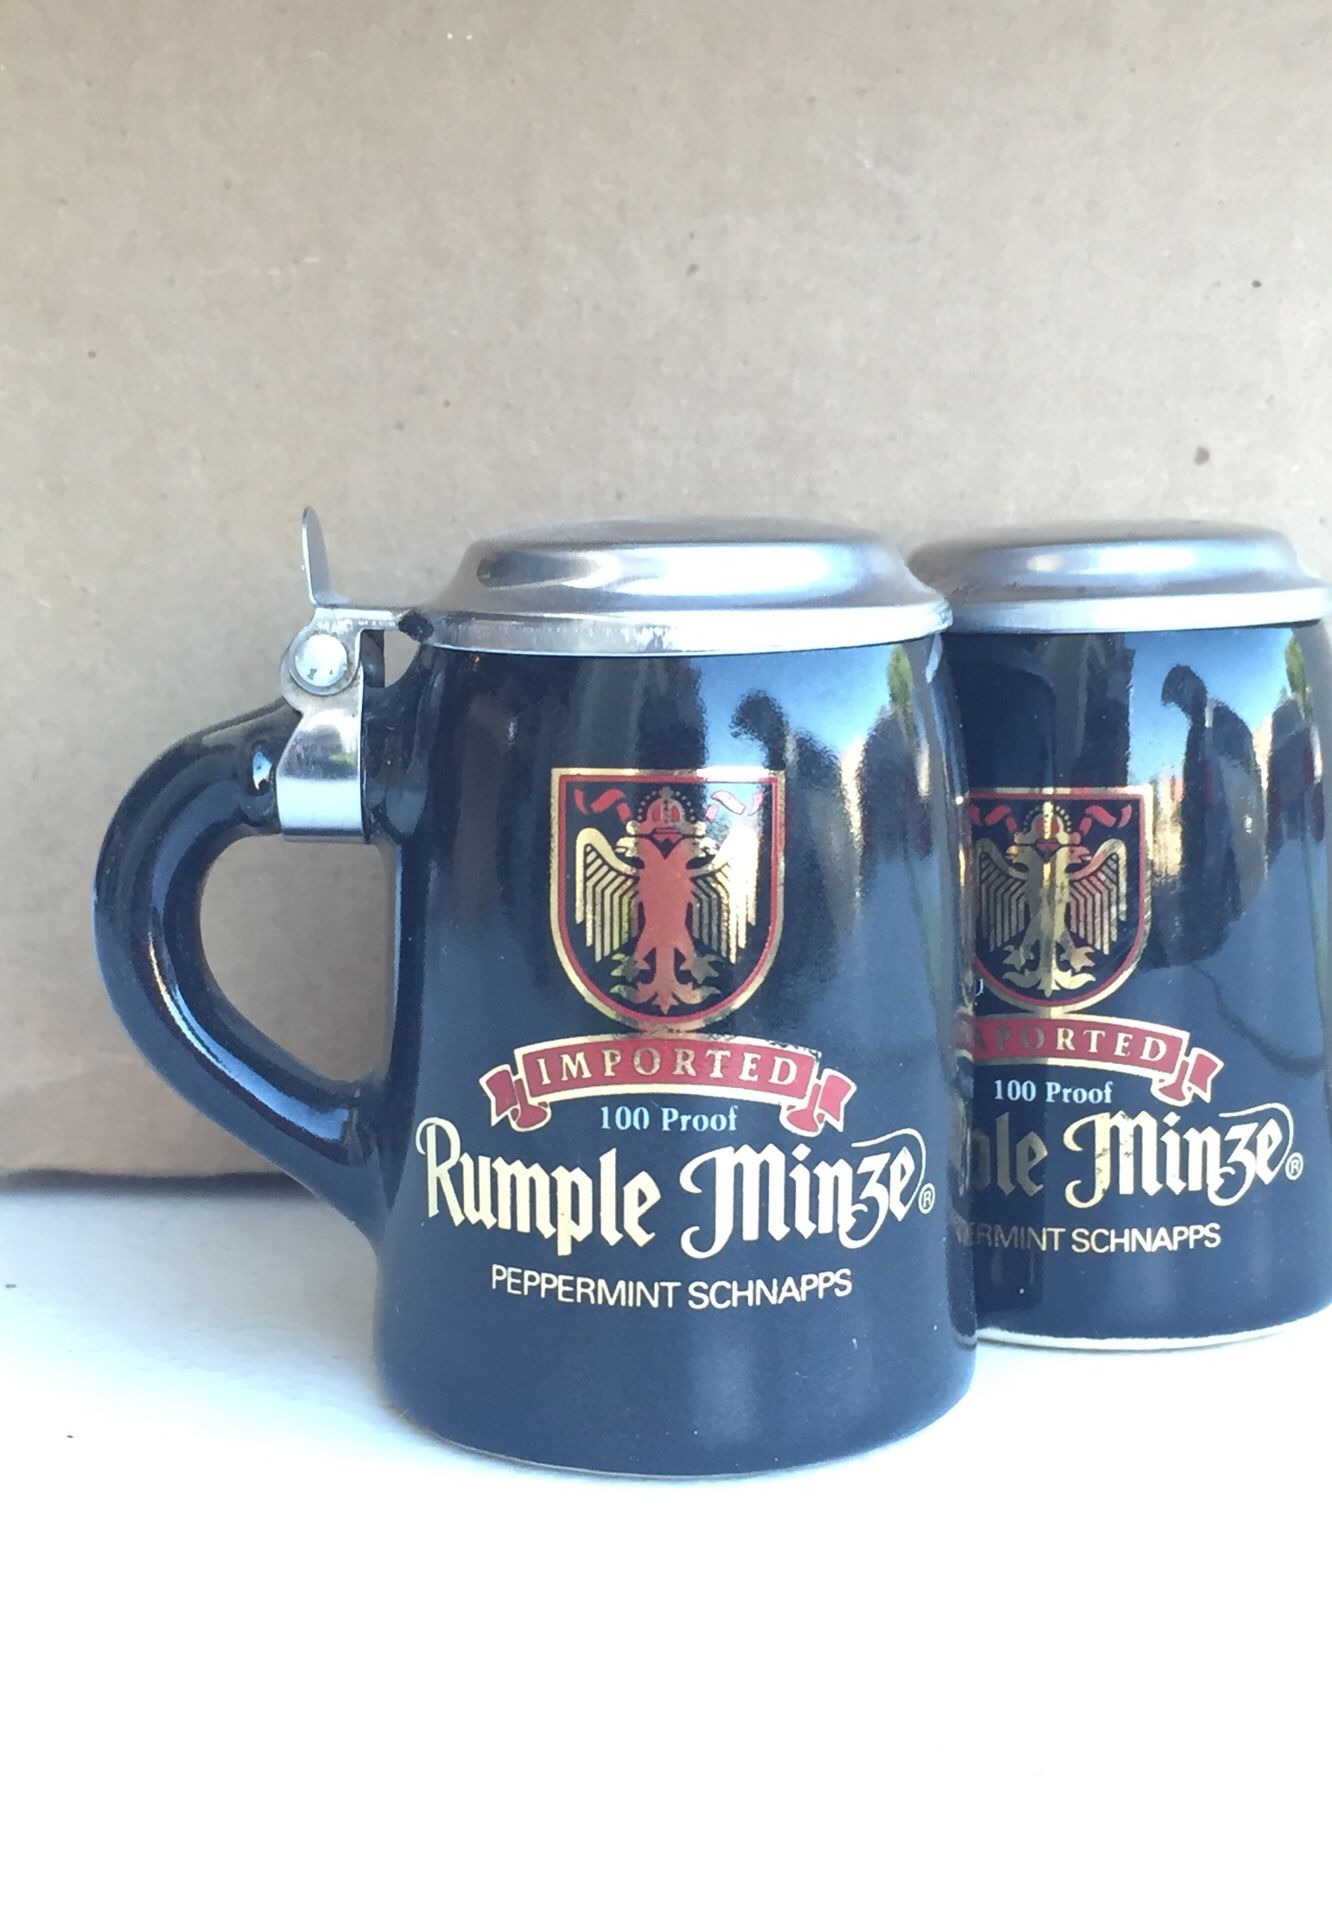 One pair of collector Rumple Minze peppermint schnapps shot glasses.